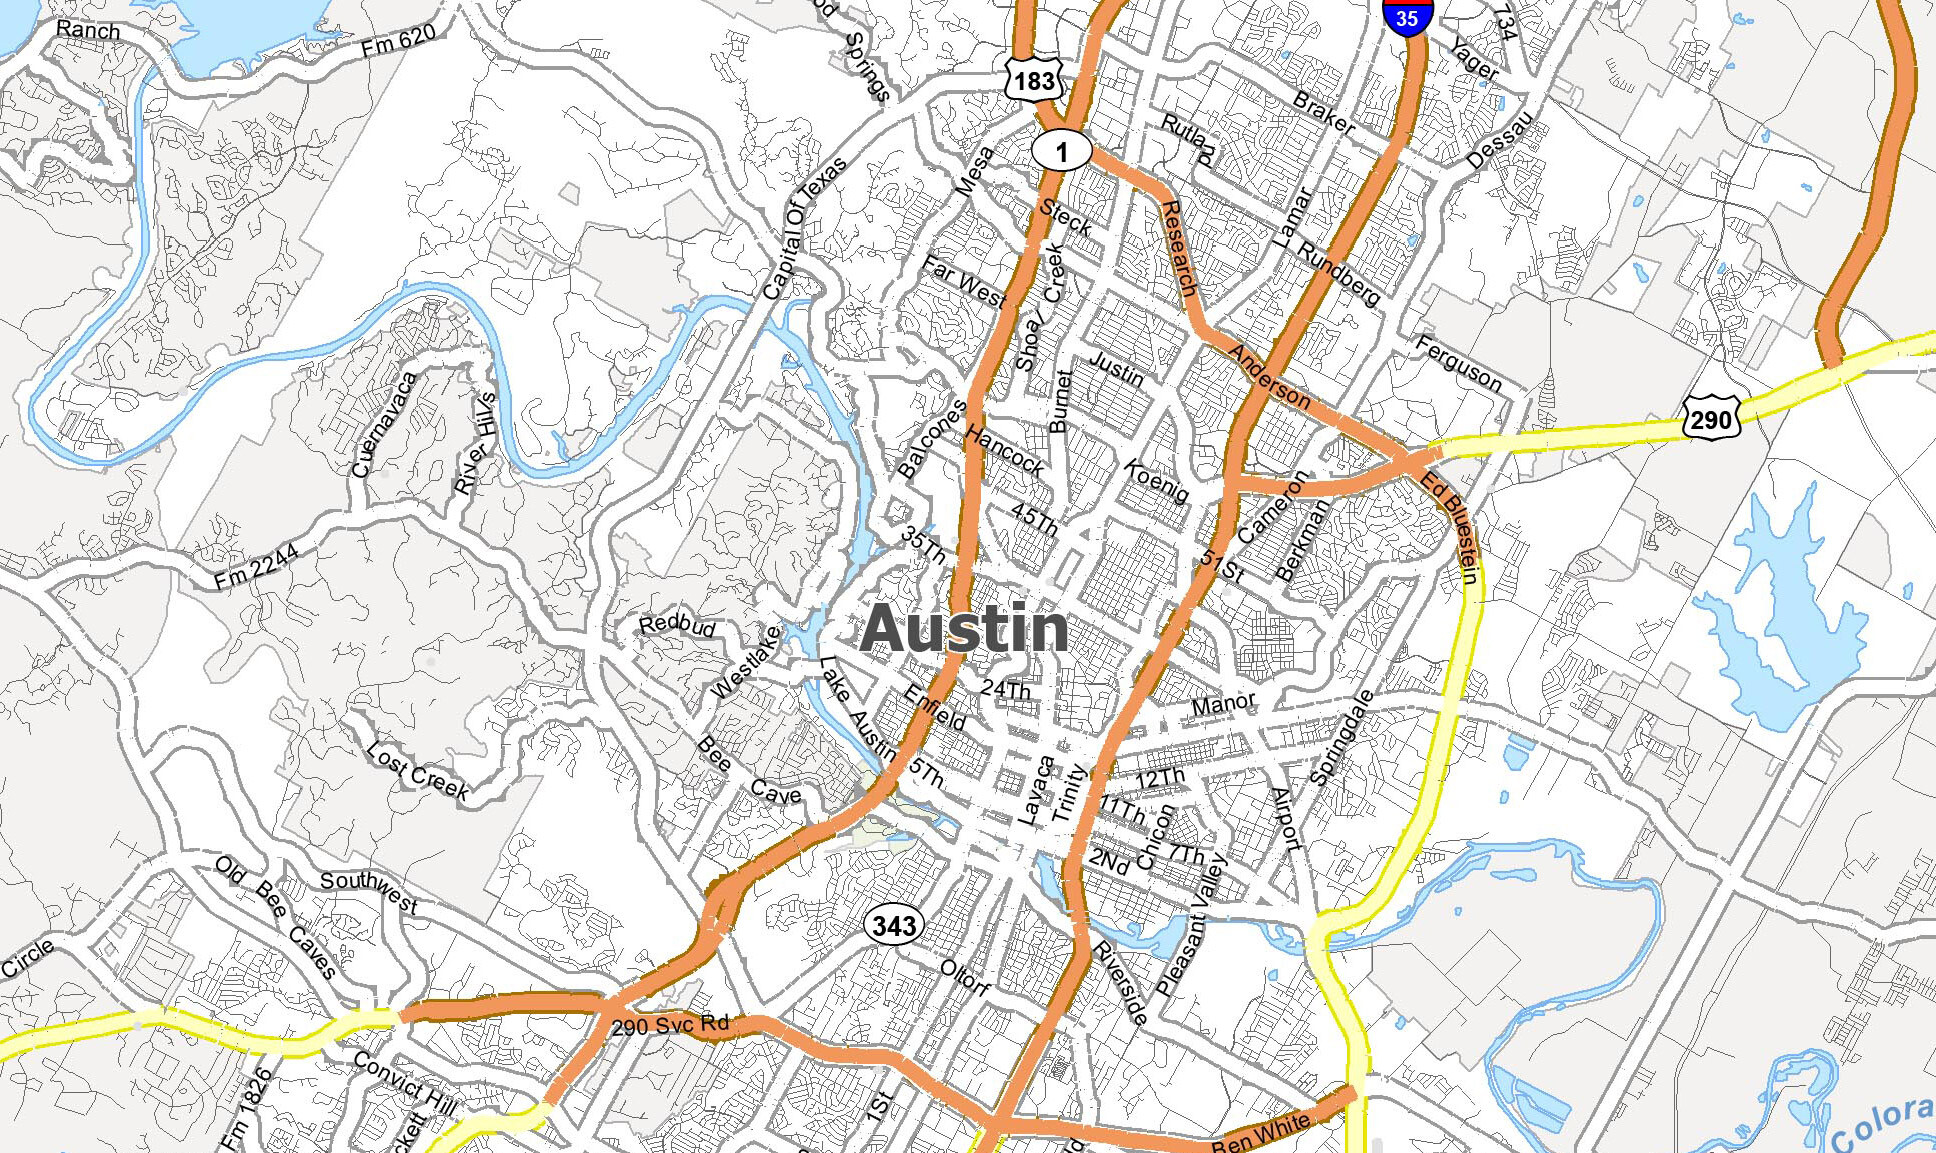 City Map Of Austin Texas - Issie Leticia